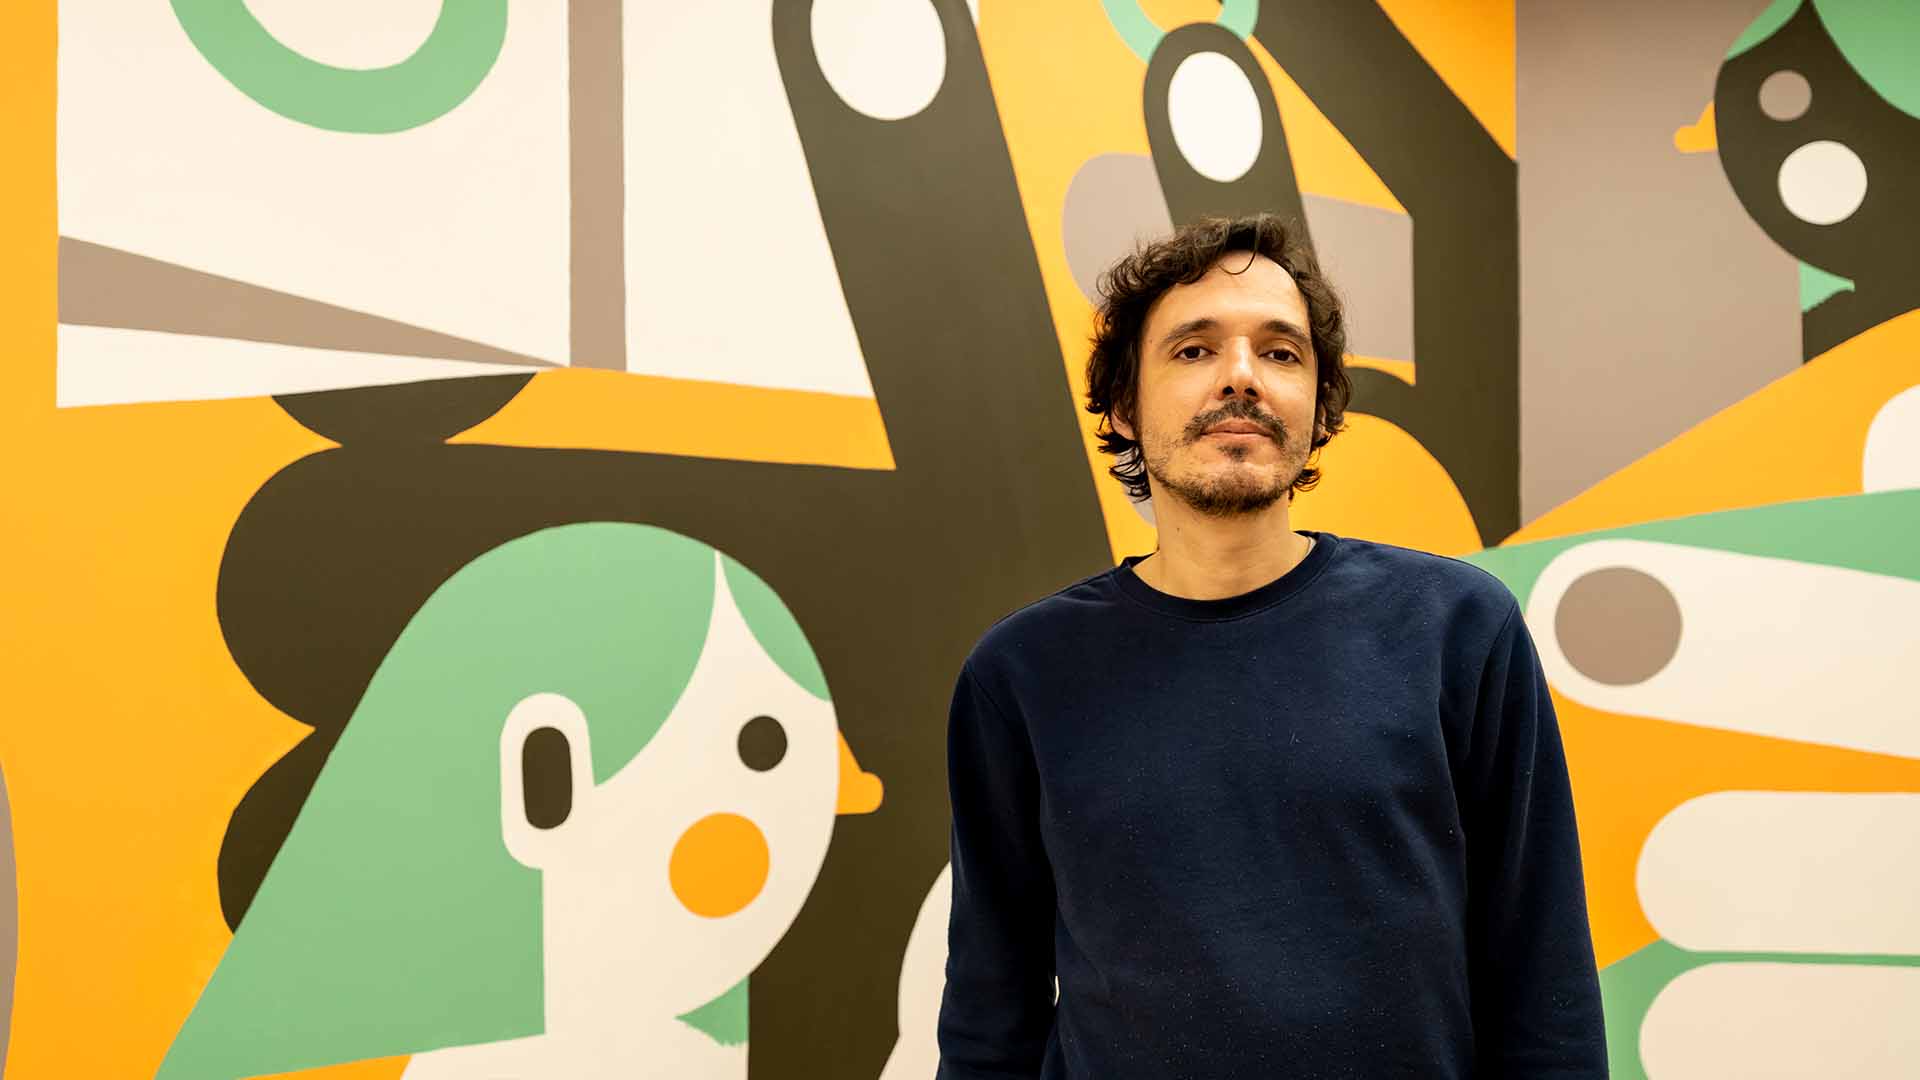 A portrait photo of Tiago Galo standing in front of a wall with his artwork.